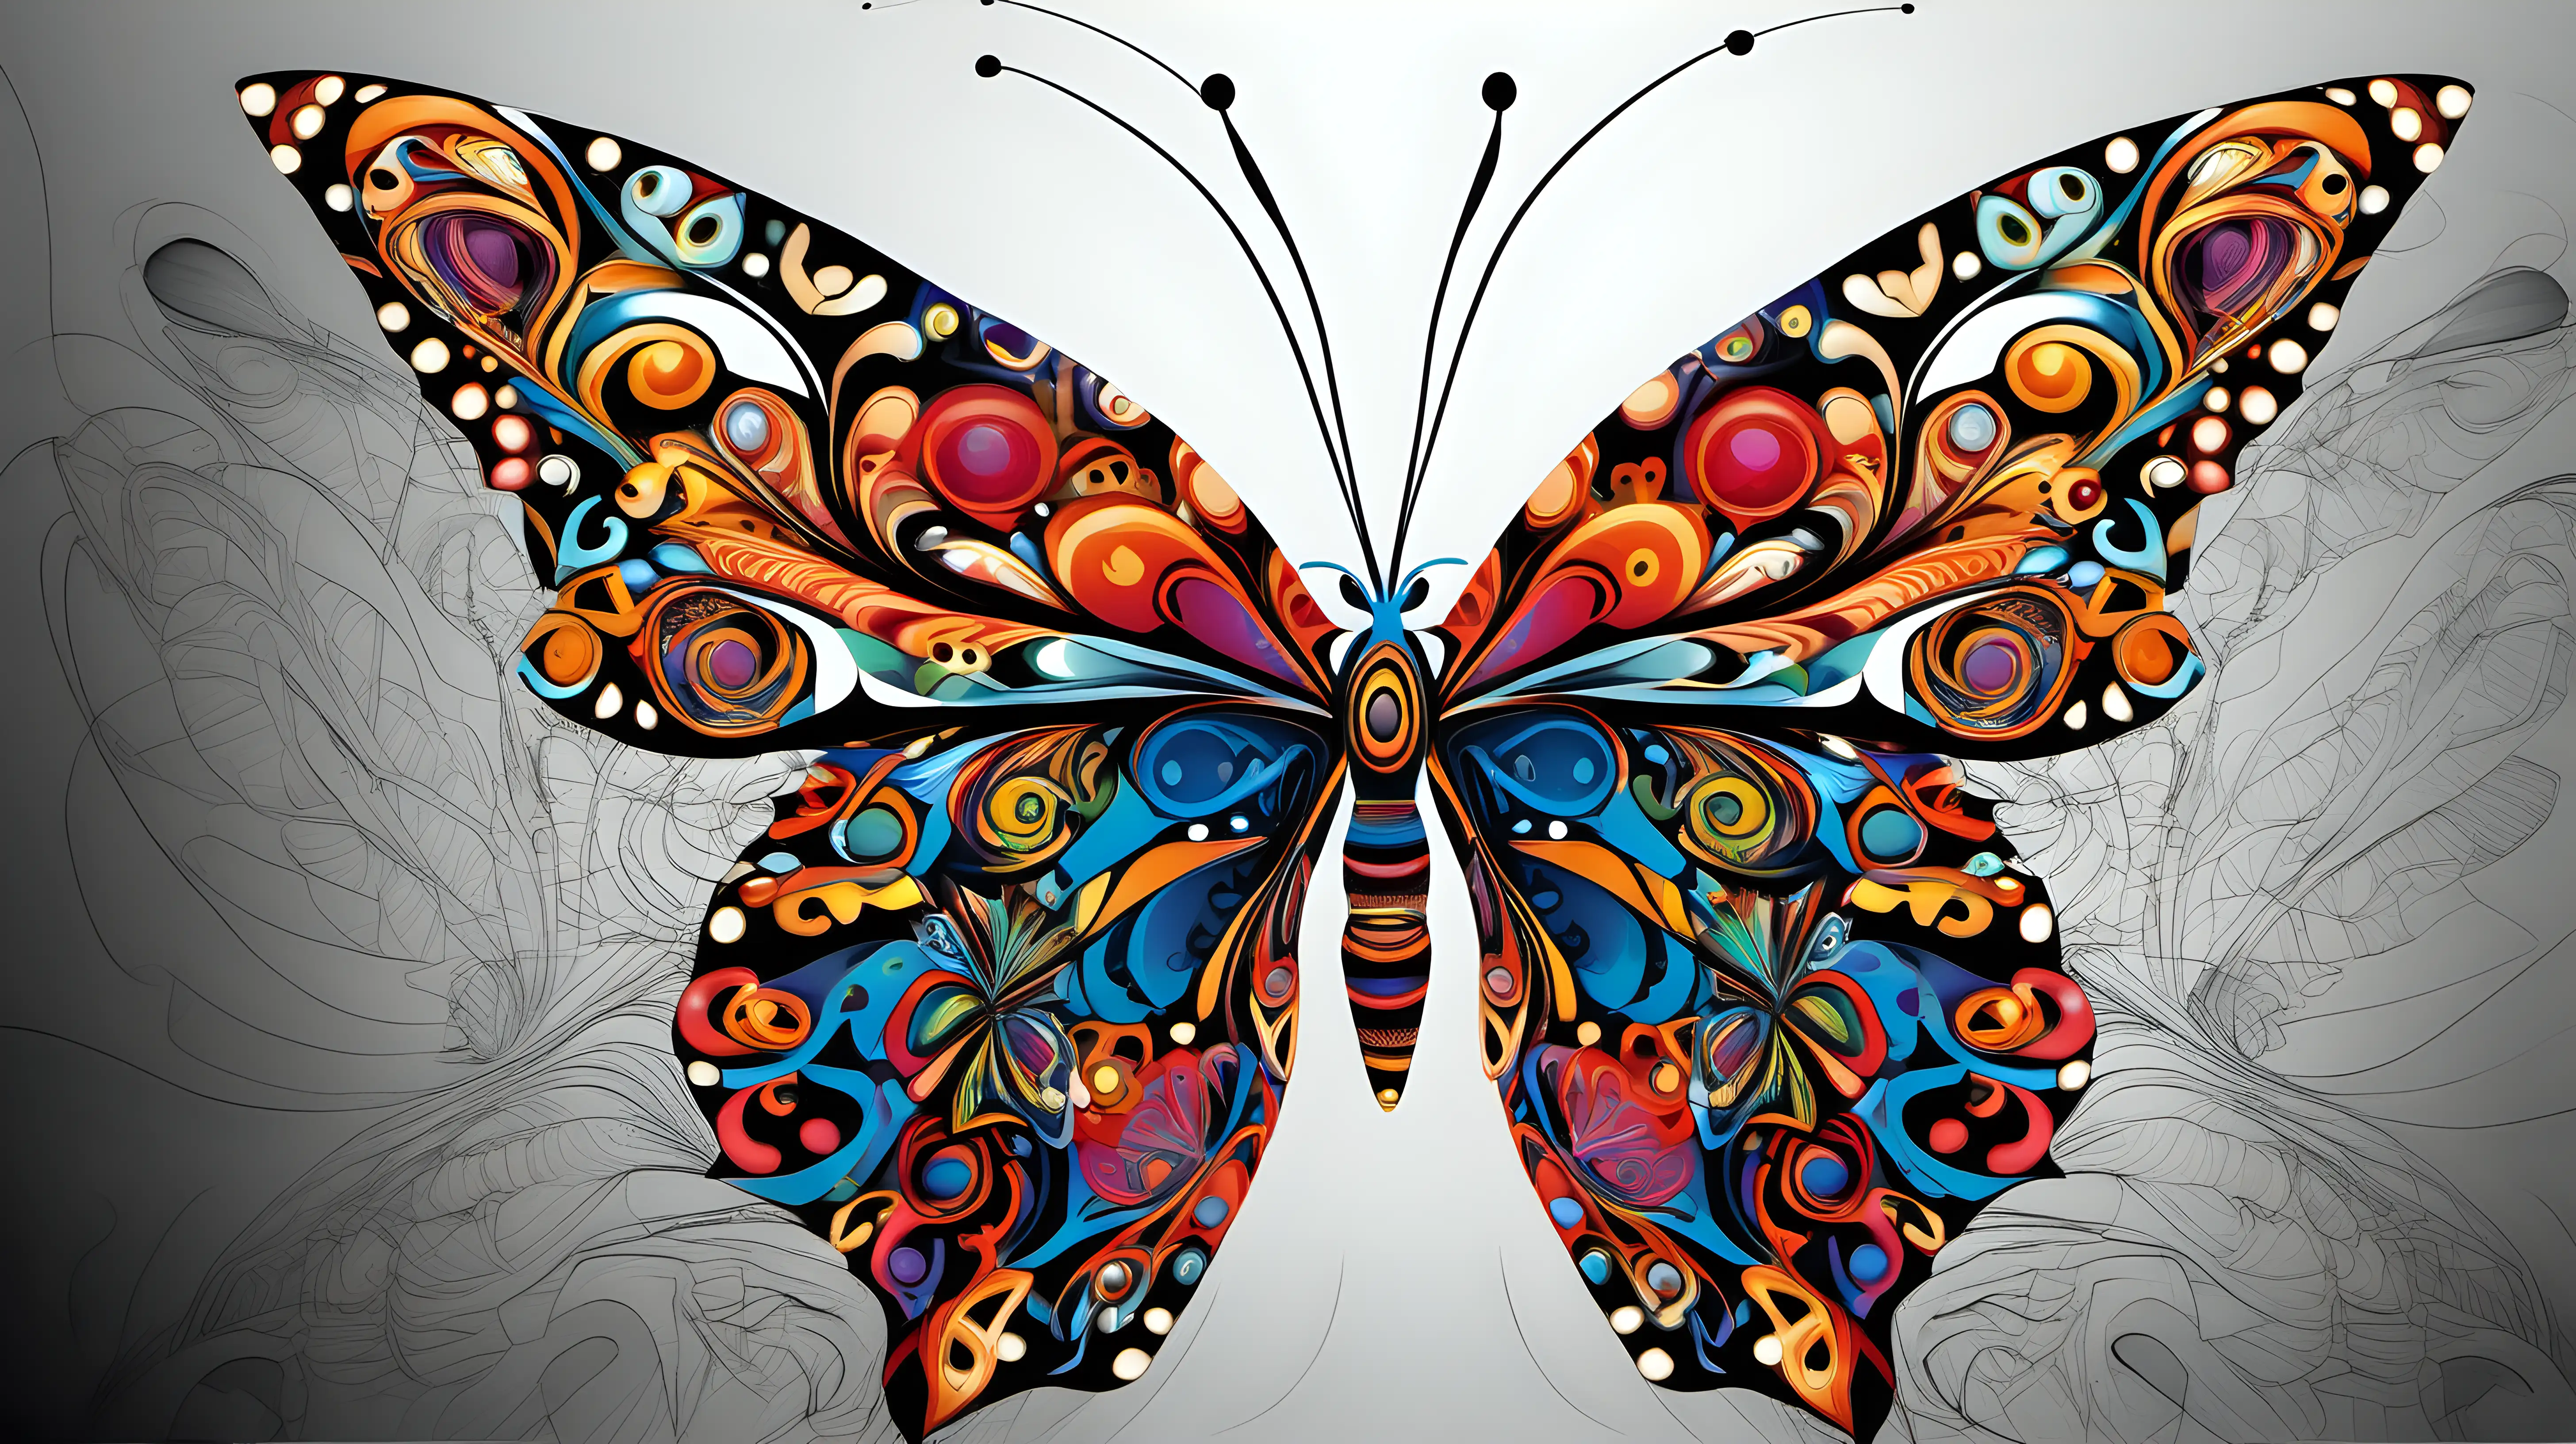 Vibrant Abstract Butterfly Art Expressive Fusion of Color and Form